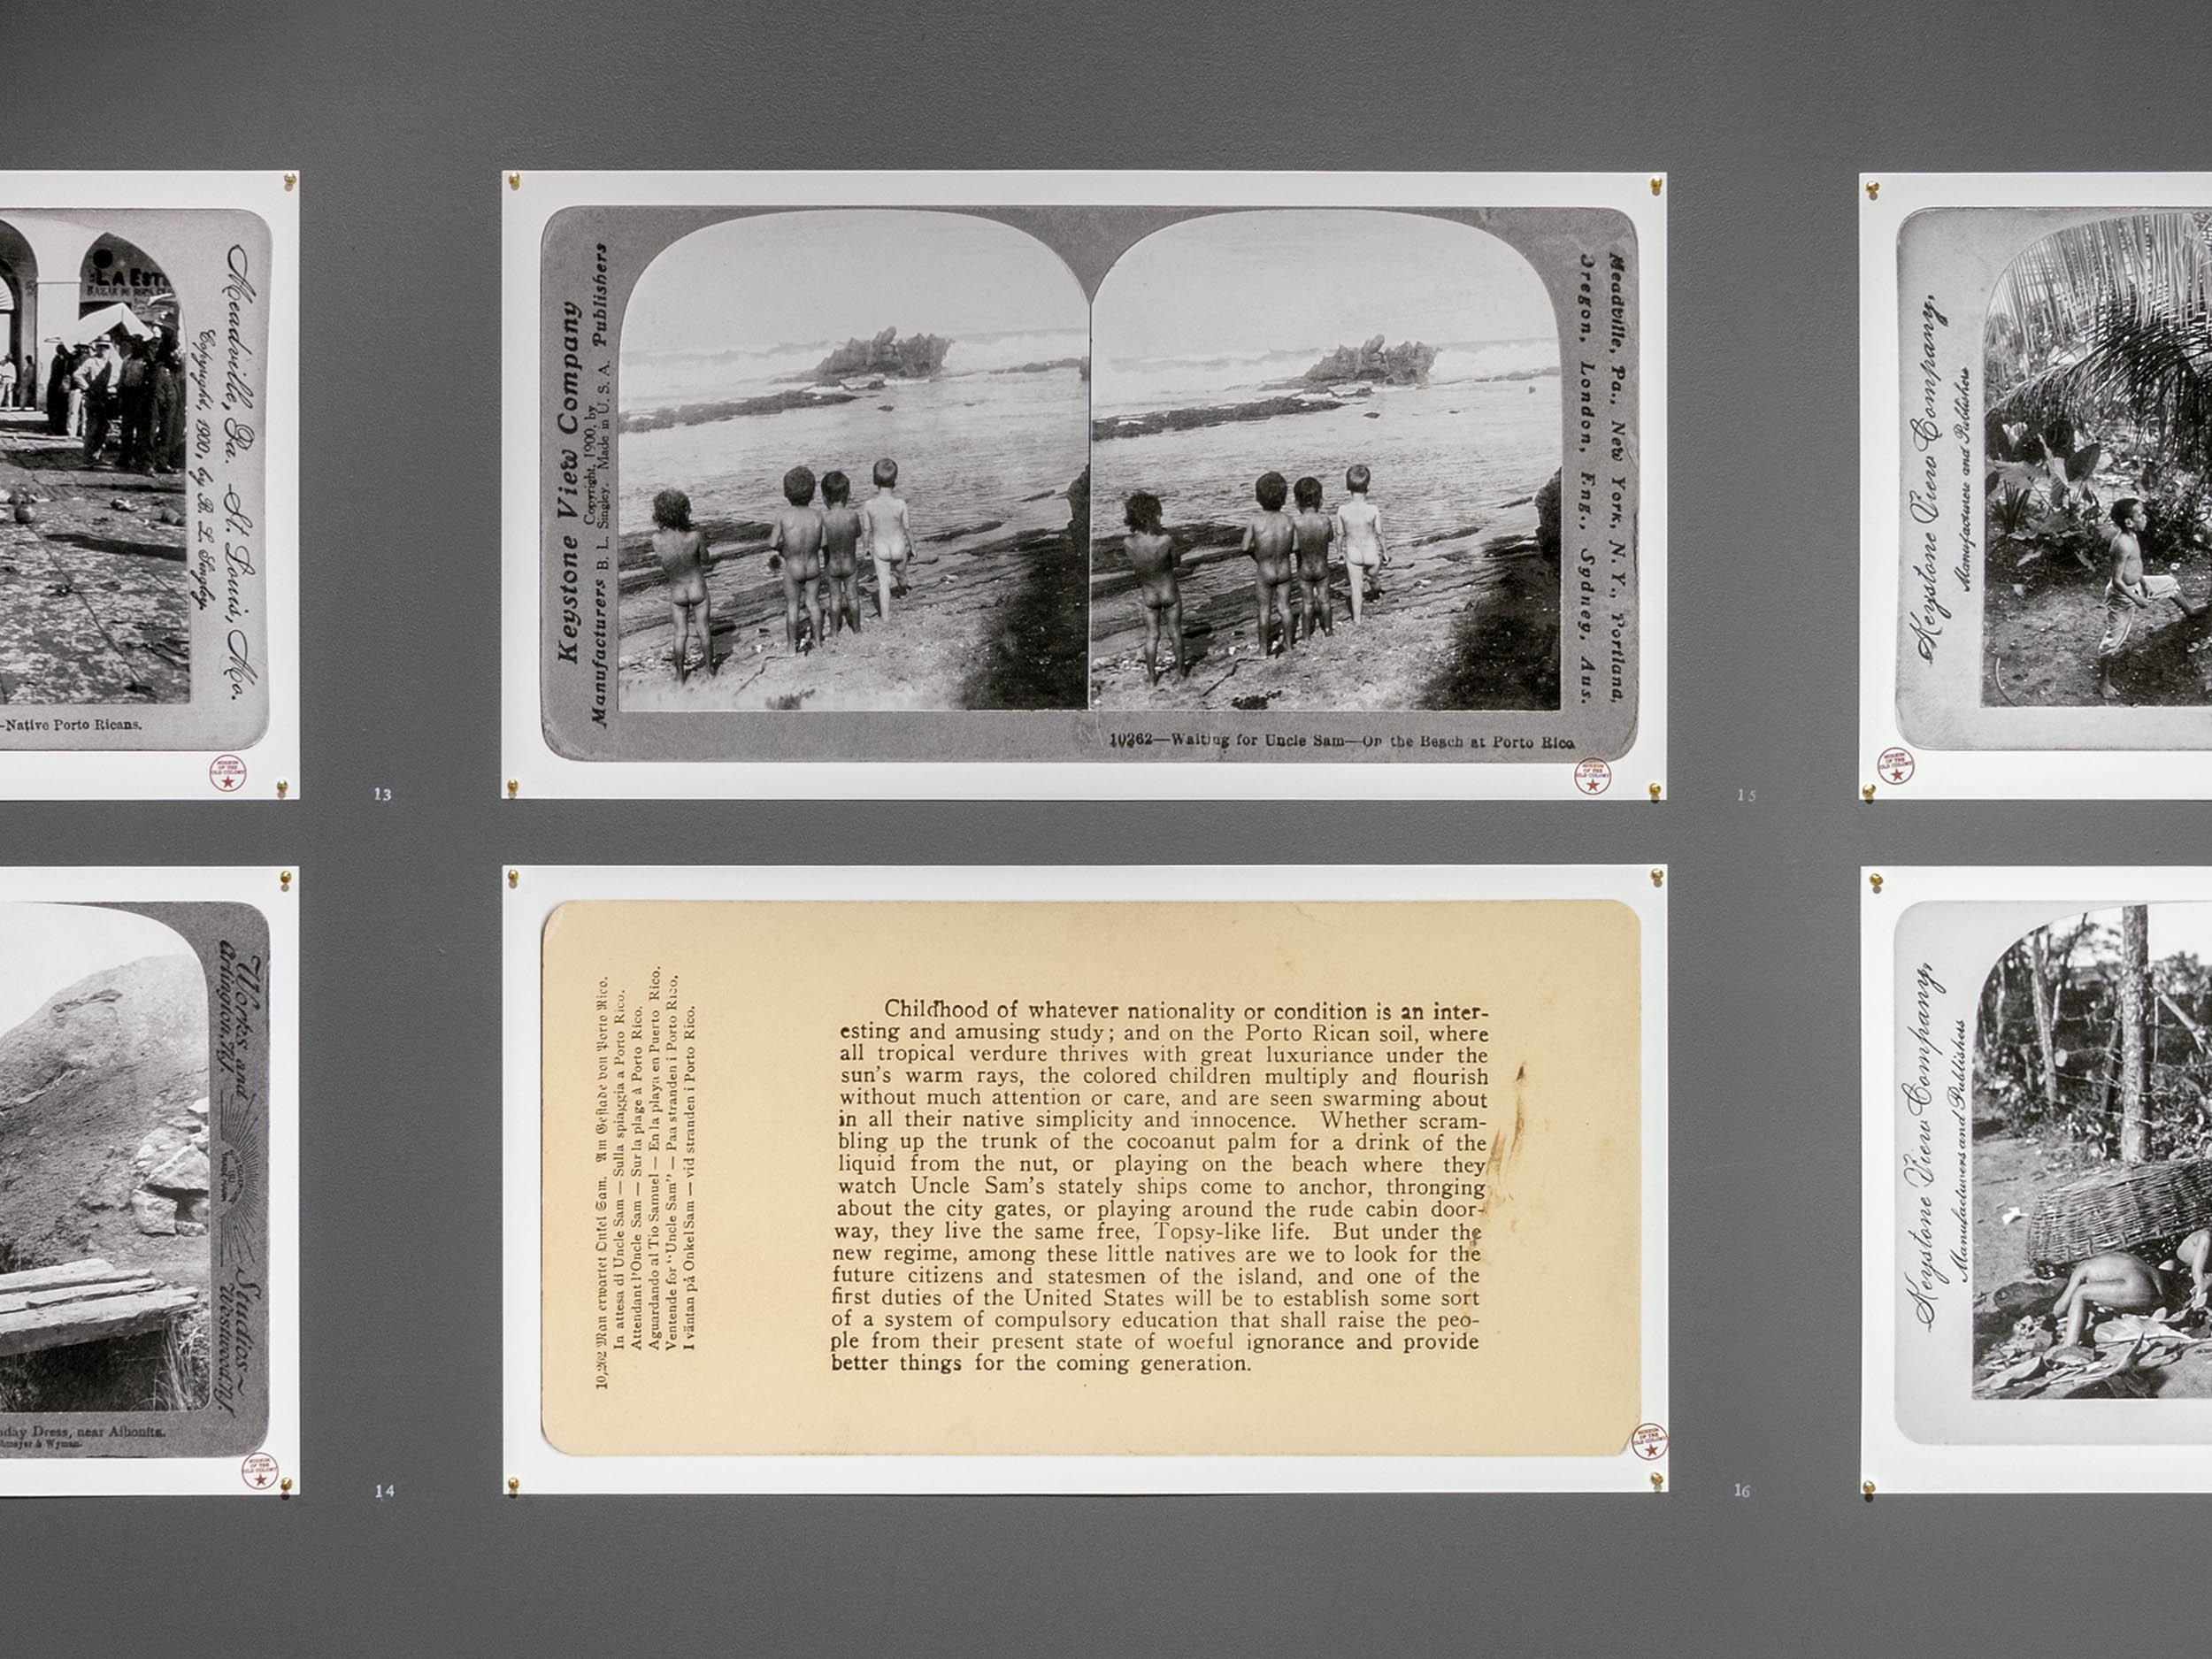  Installation view (cropped). Stereographs of Puerto Rican children; at center:  Waiting for Uncle Sam–On the Beach at Porto Rico  and caption. Photograph by B.L. Singley, Keystone View Company, Meadville, PA, 1900 | 2019.  The Museum of the Old Colo